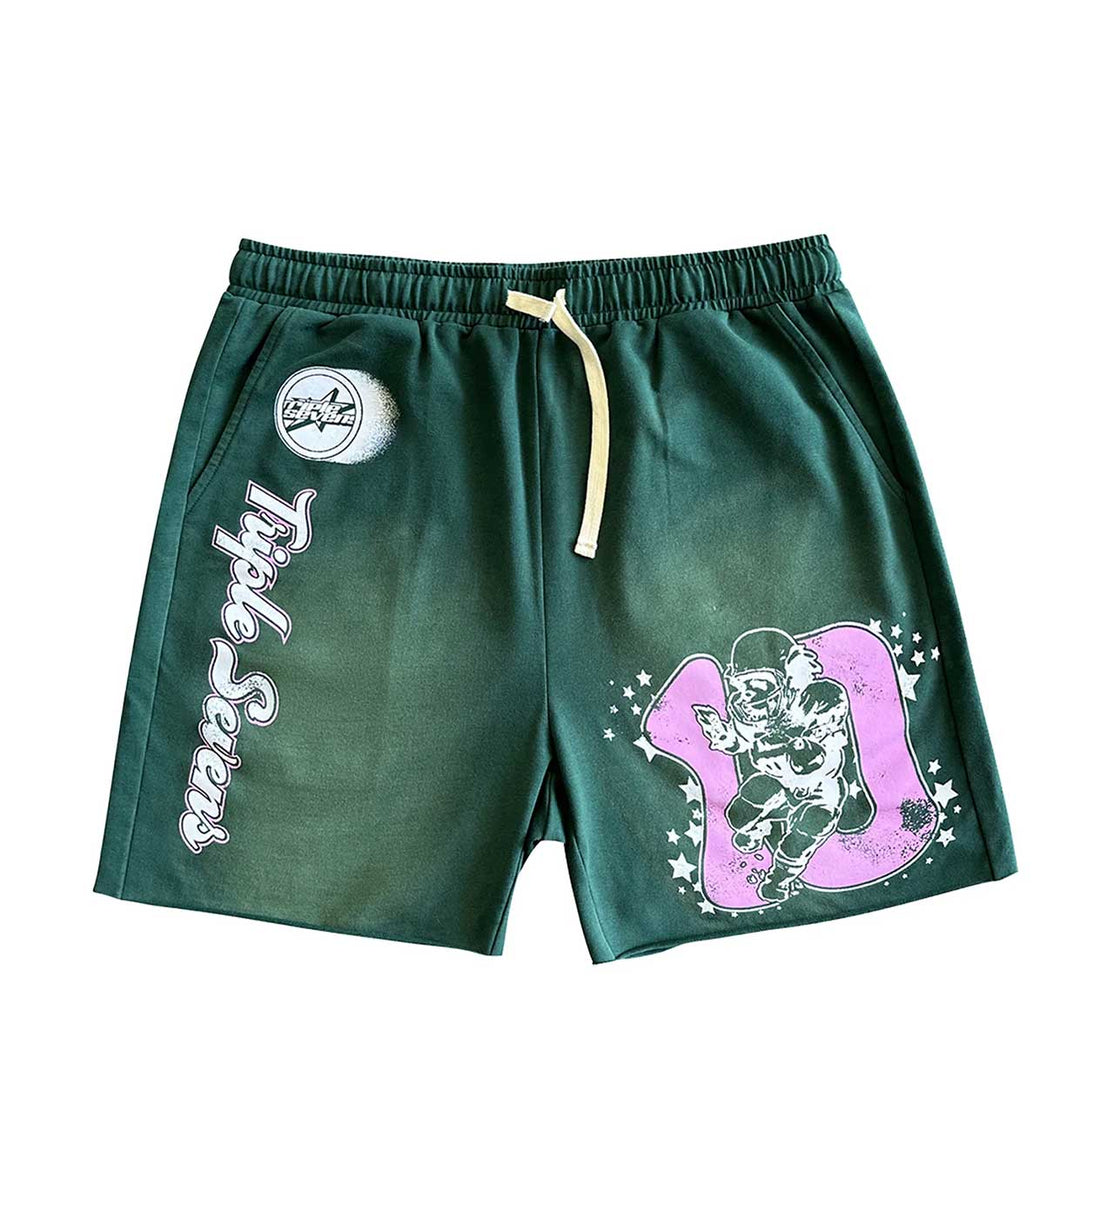 Triple Sevens Green Shorts Front View